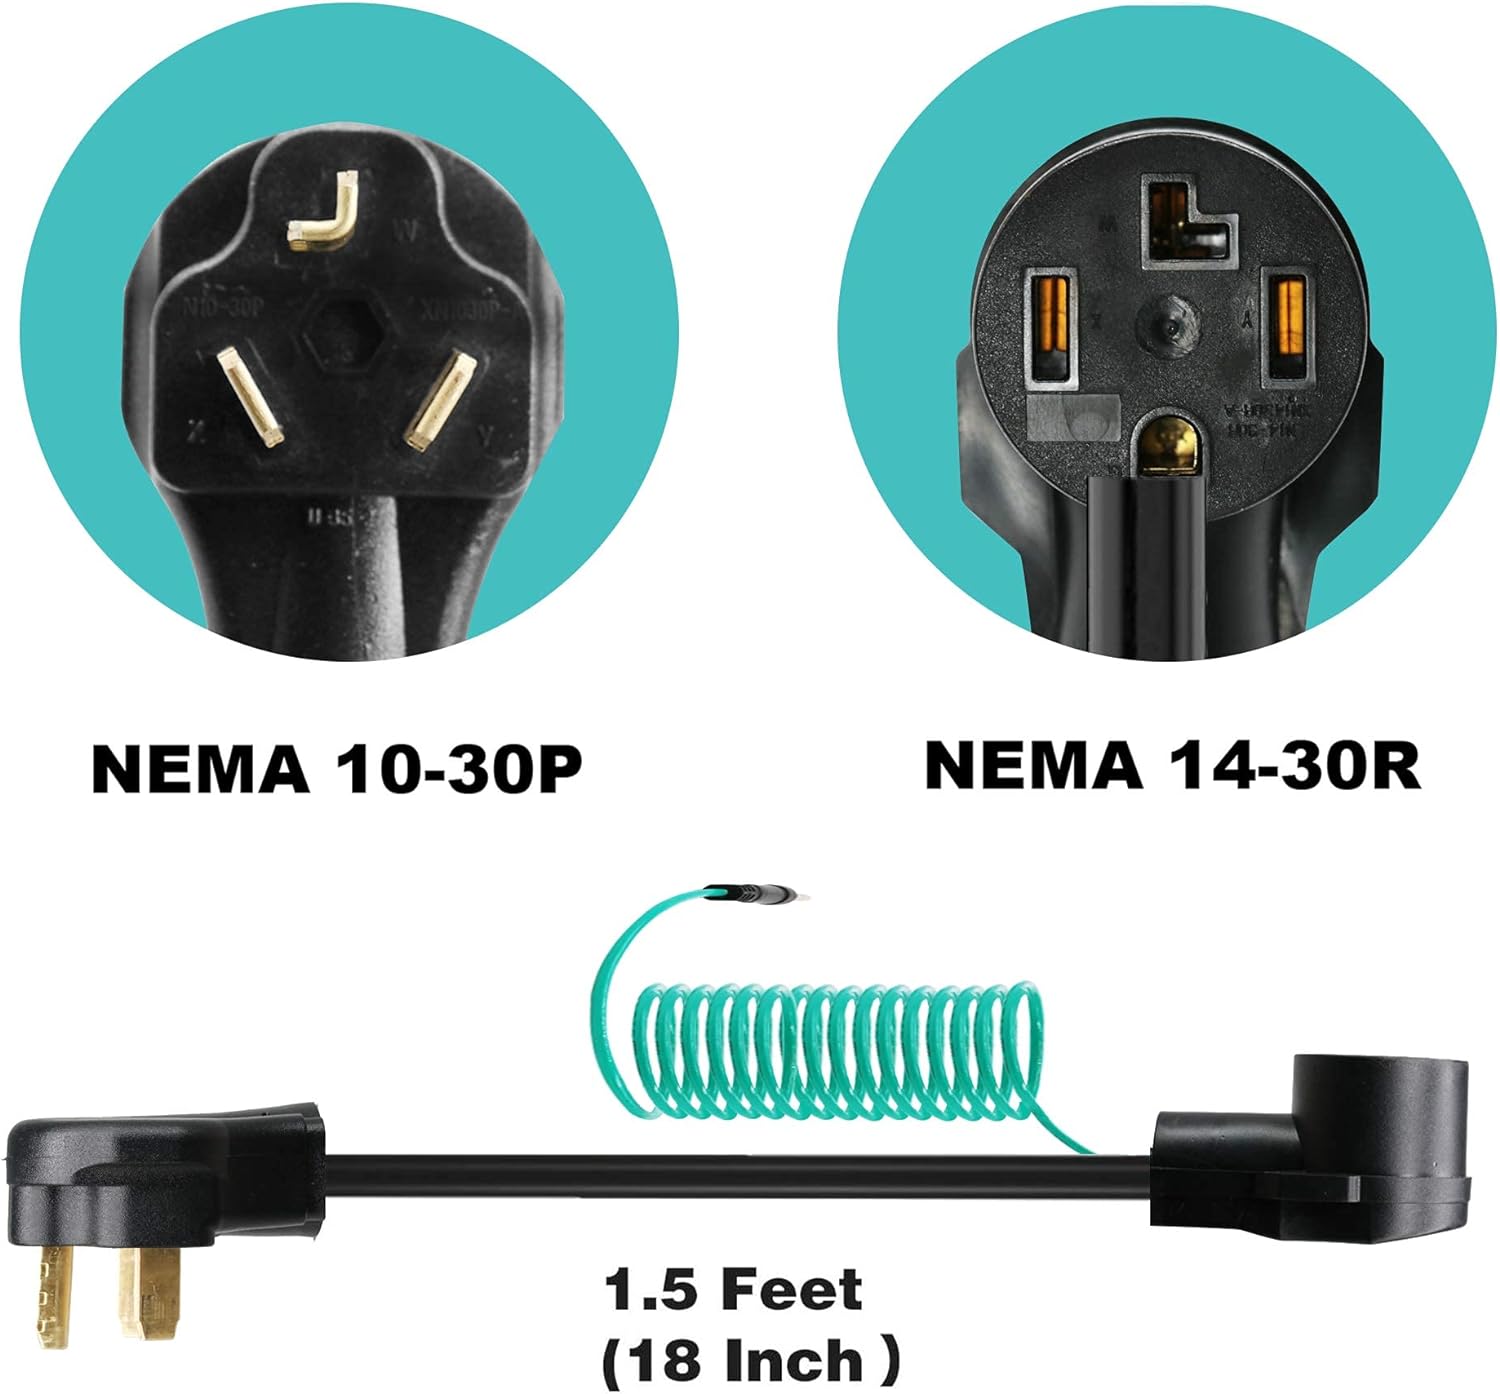 CircleCord Dryer Adapter 4 Prong to 3 Prong, 4P Newer Dryer to 3P Older House, Dryer Convert Cord NEMA 10-30P Plug to 14-30R Receptacle, 2